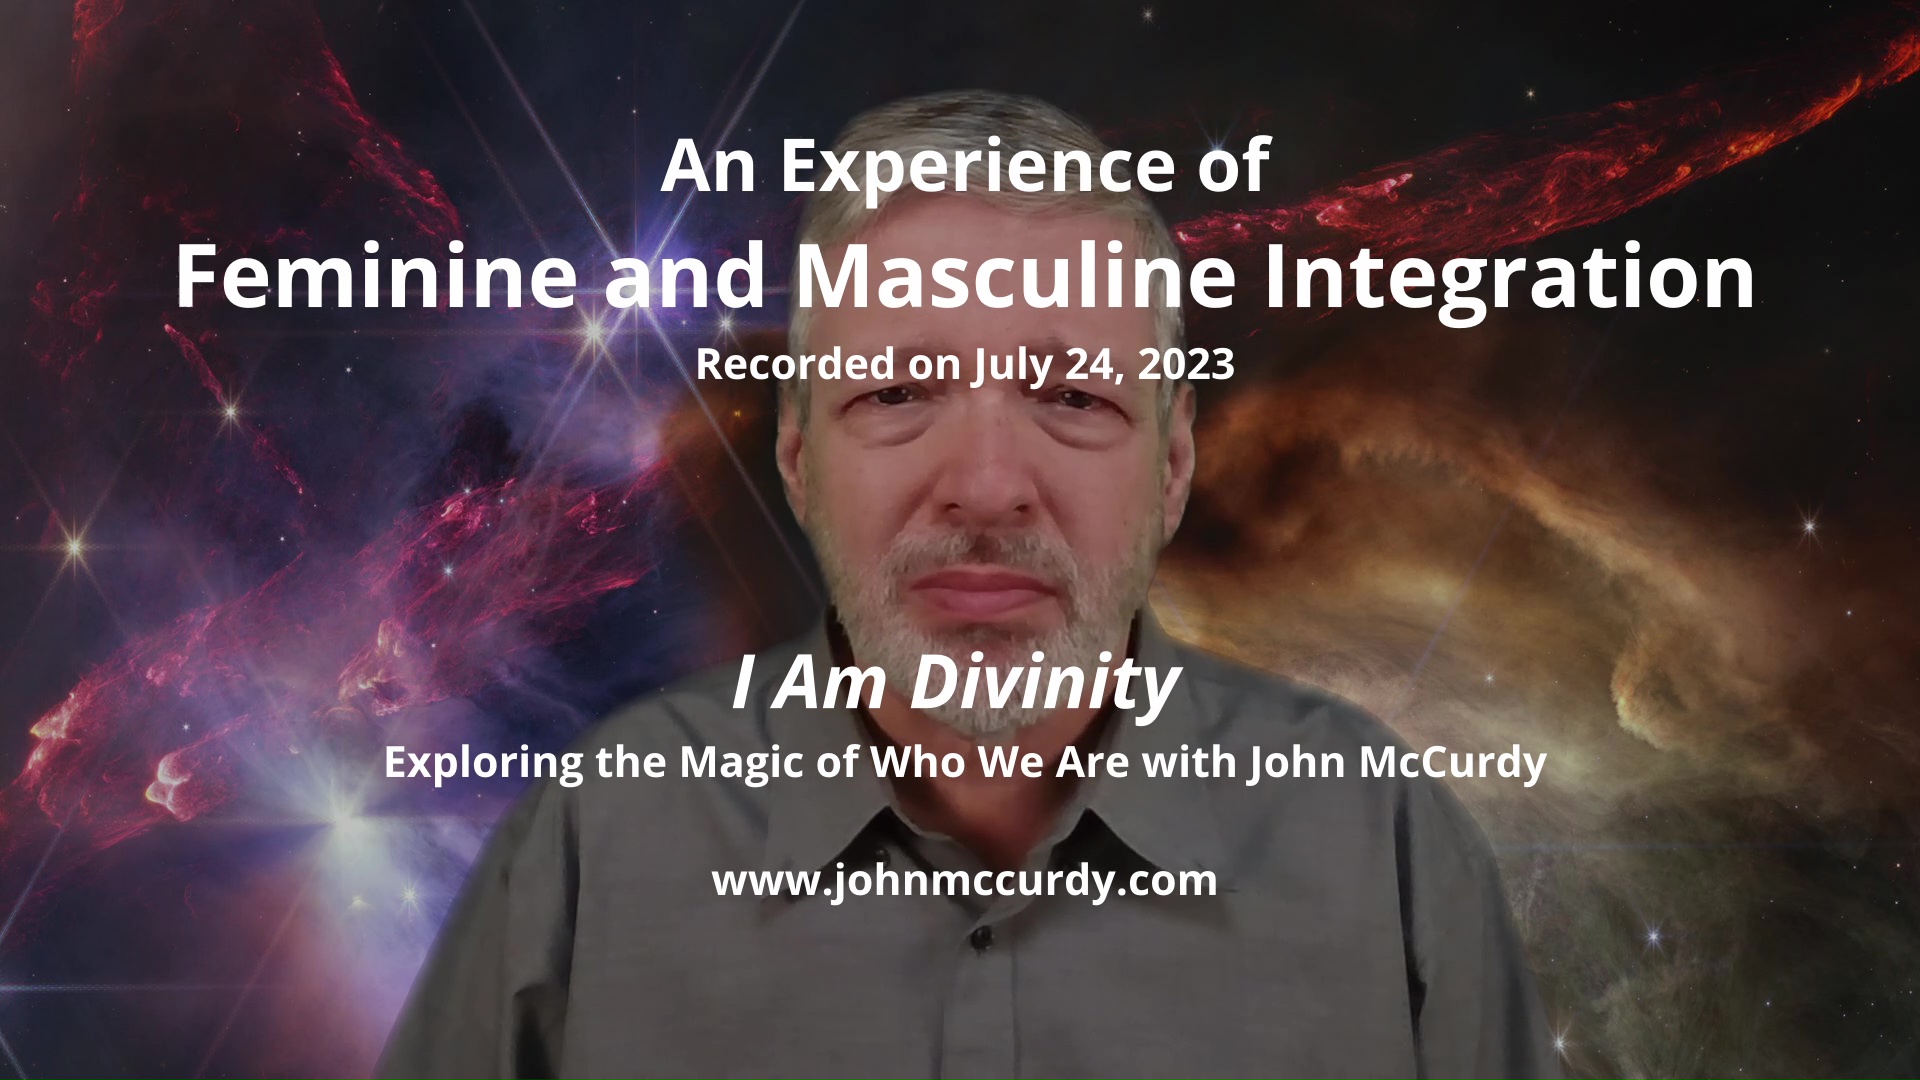 An Experience of Feminine and Masculine Integration